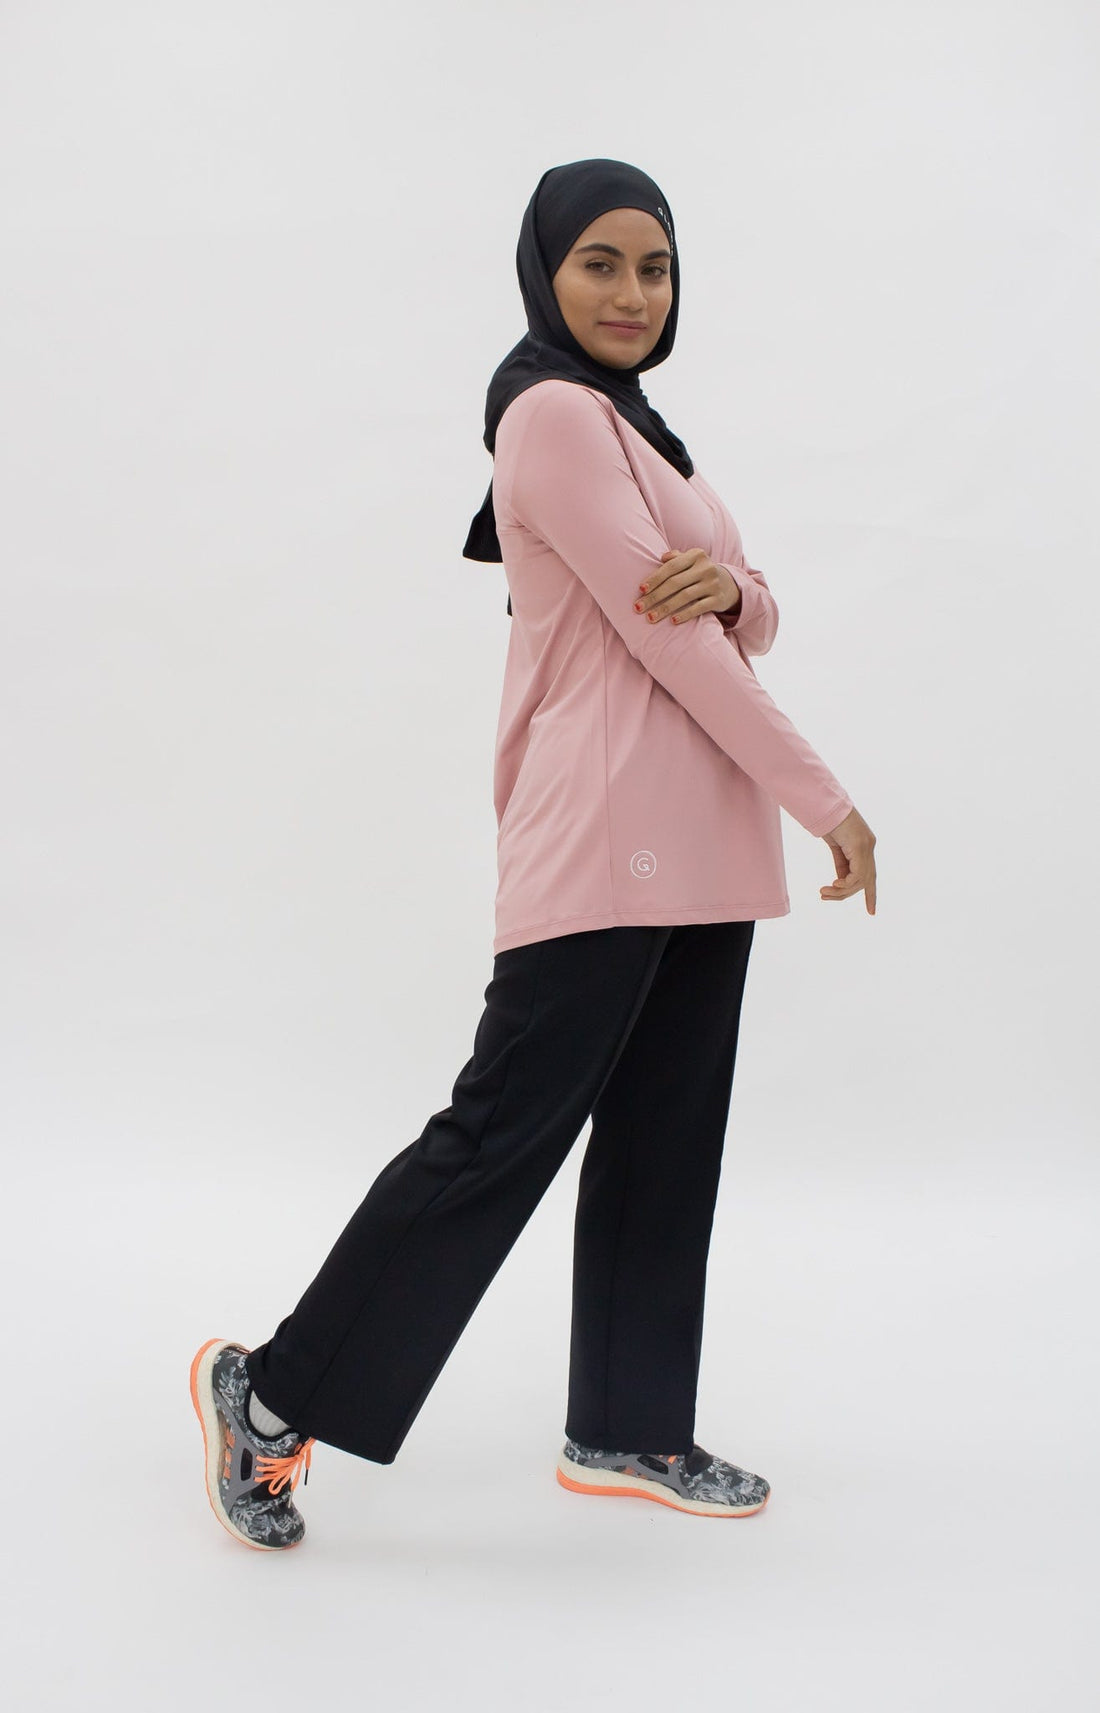 Sports Tops GLOWco Exclusive Pleated Top in Blush Pink